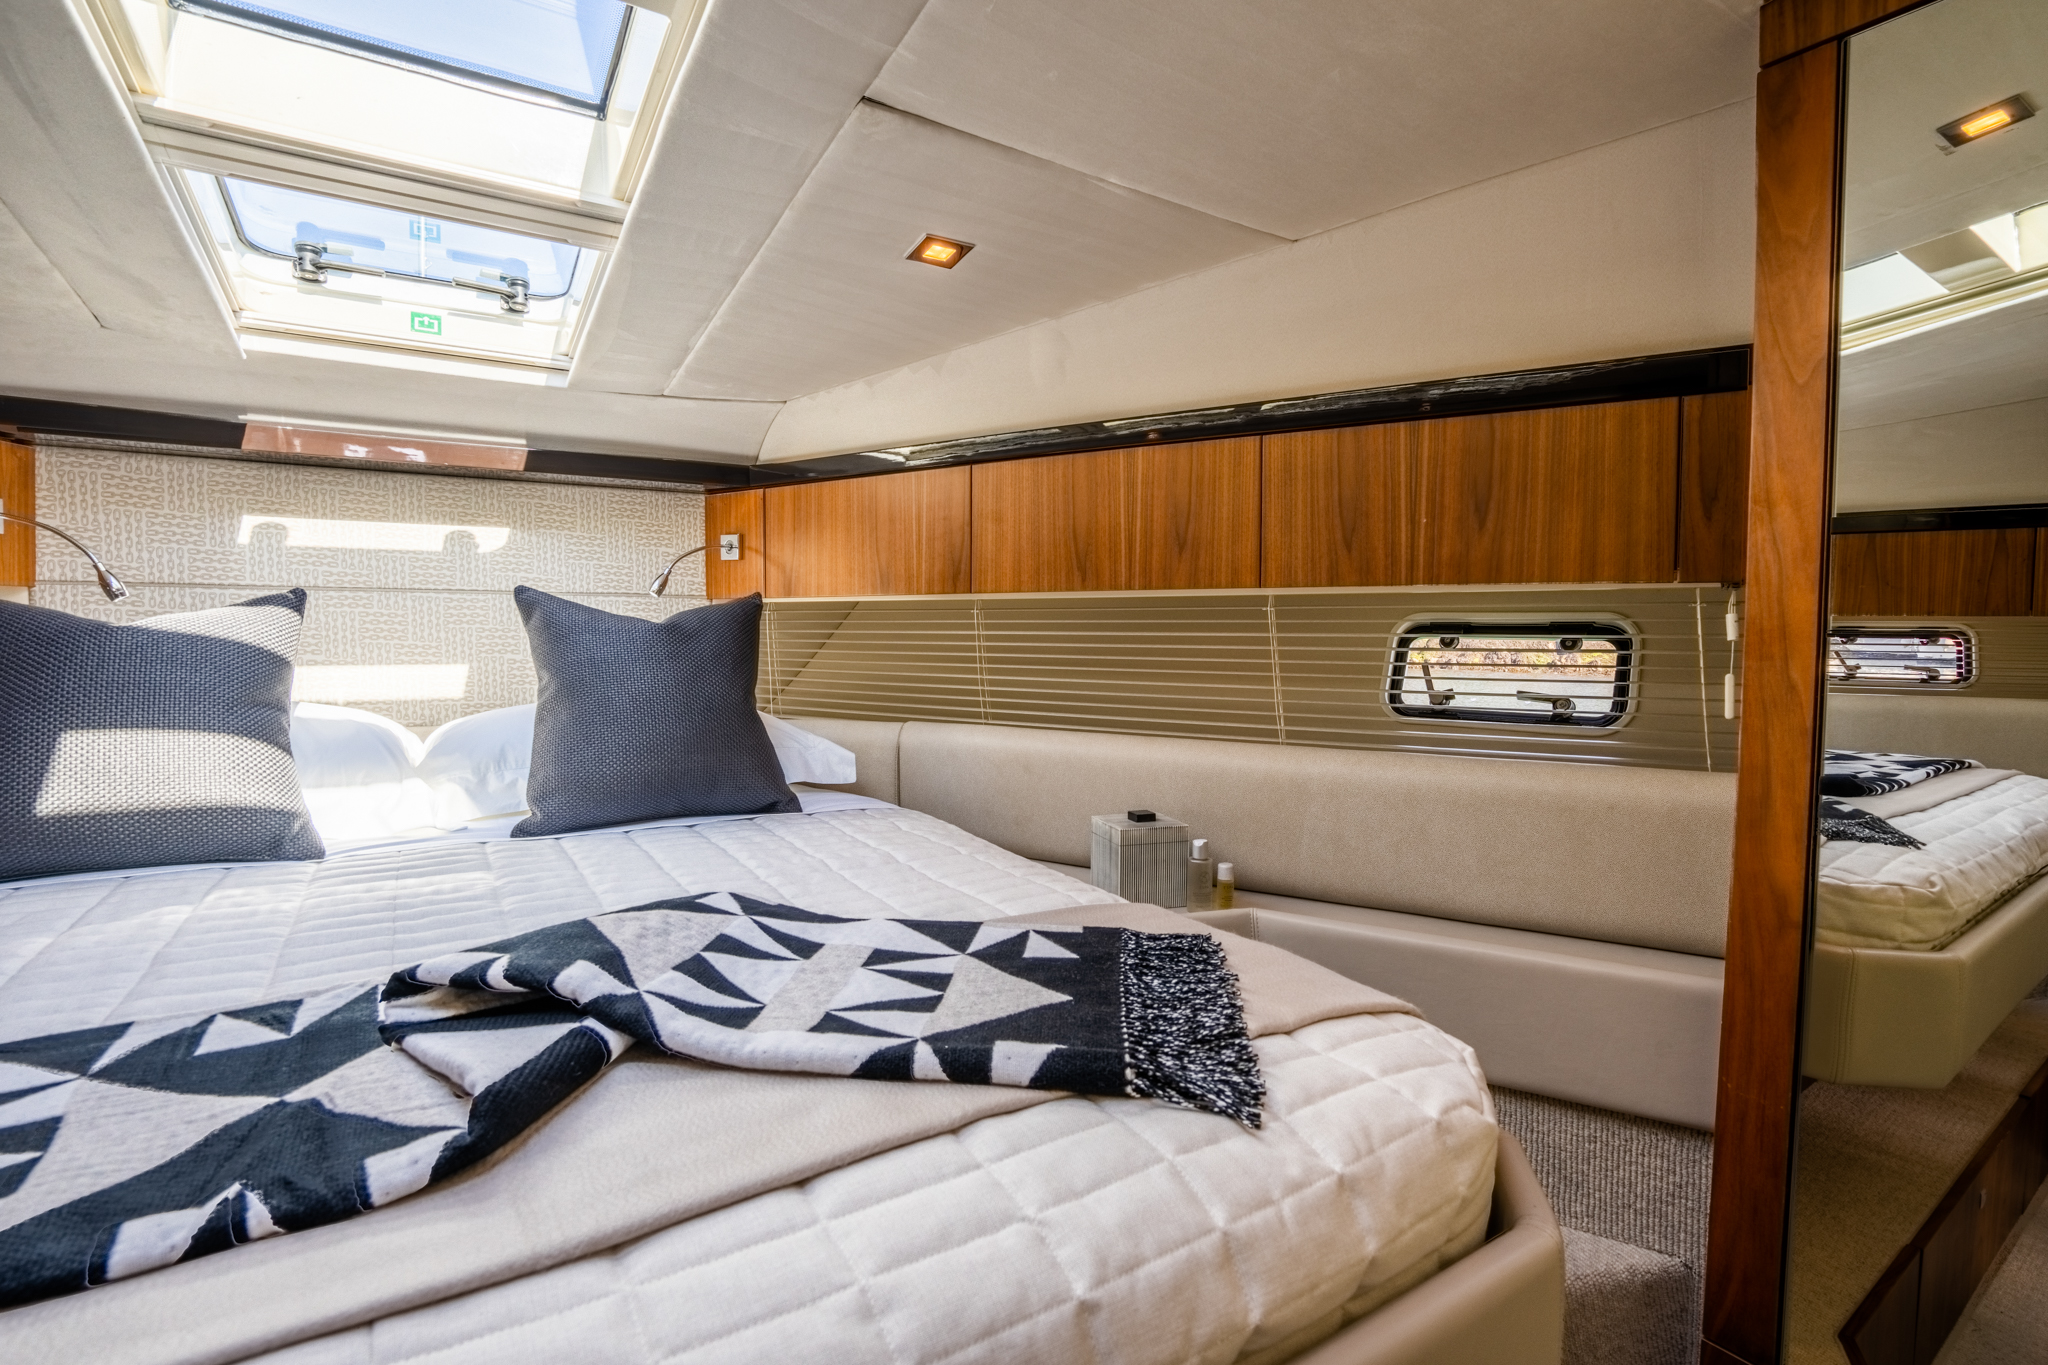 A beautifully decorated and fitted double yacht cabin